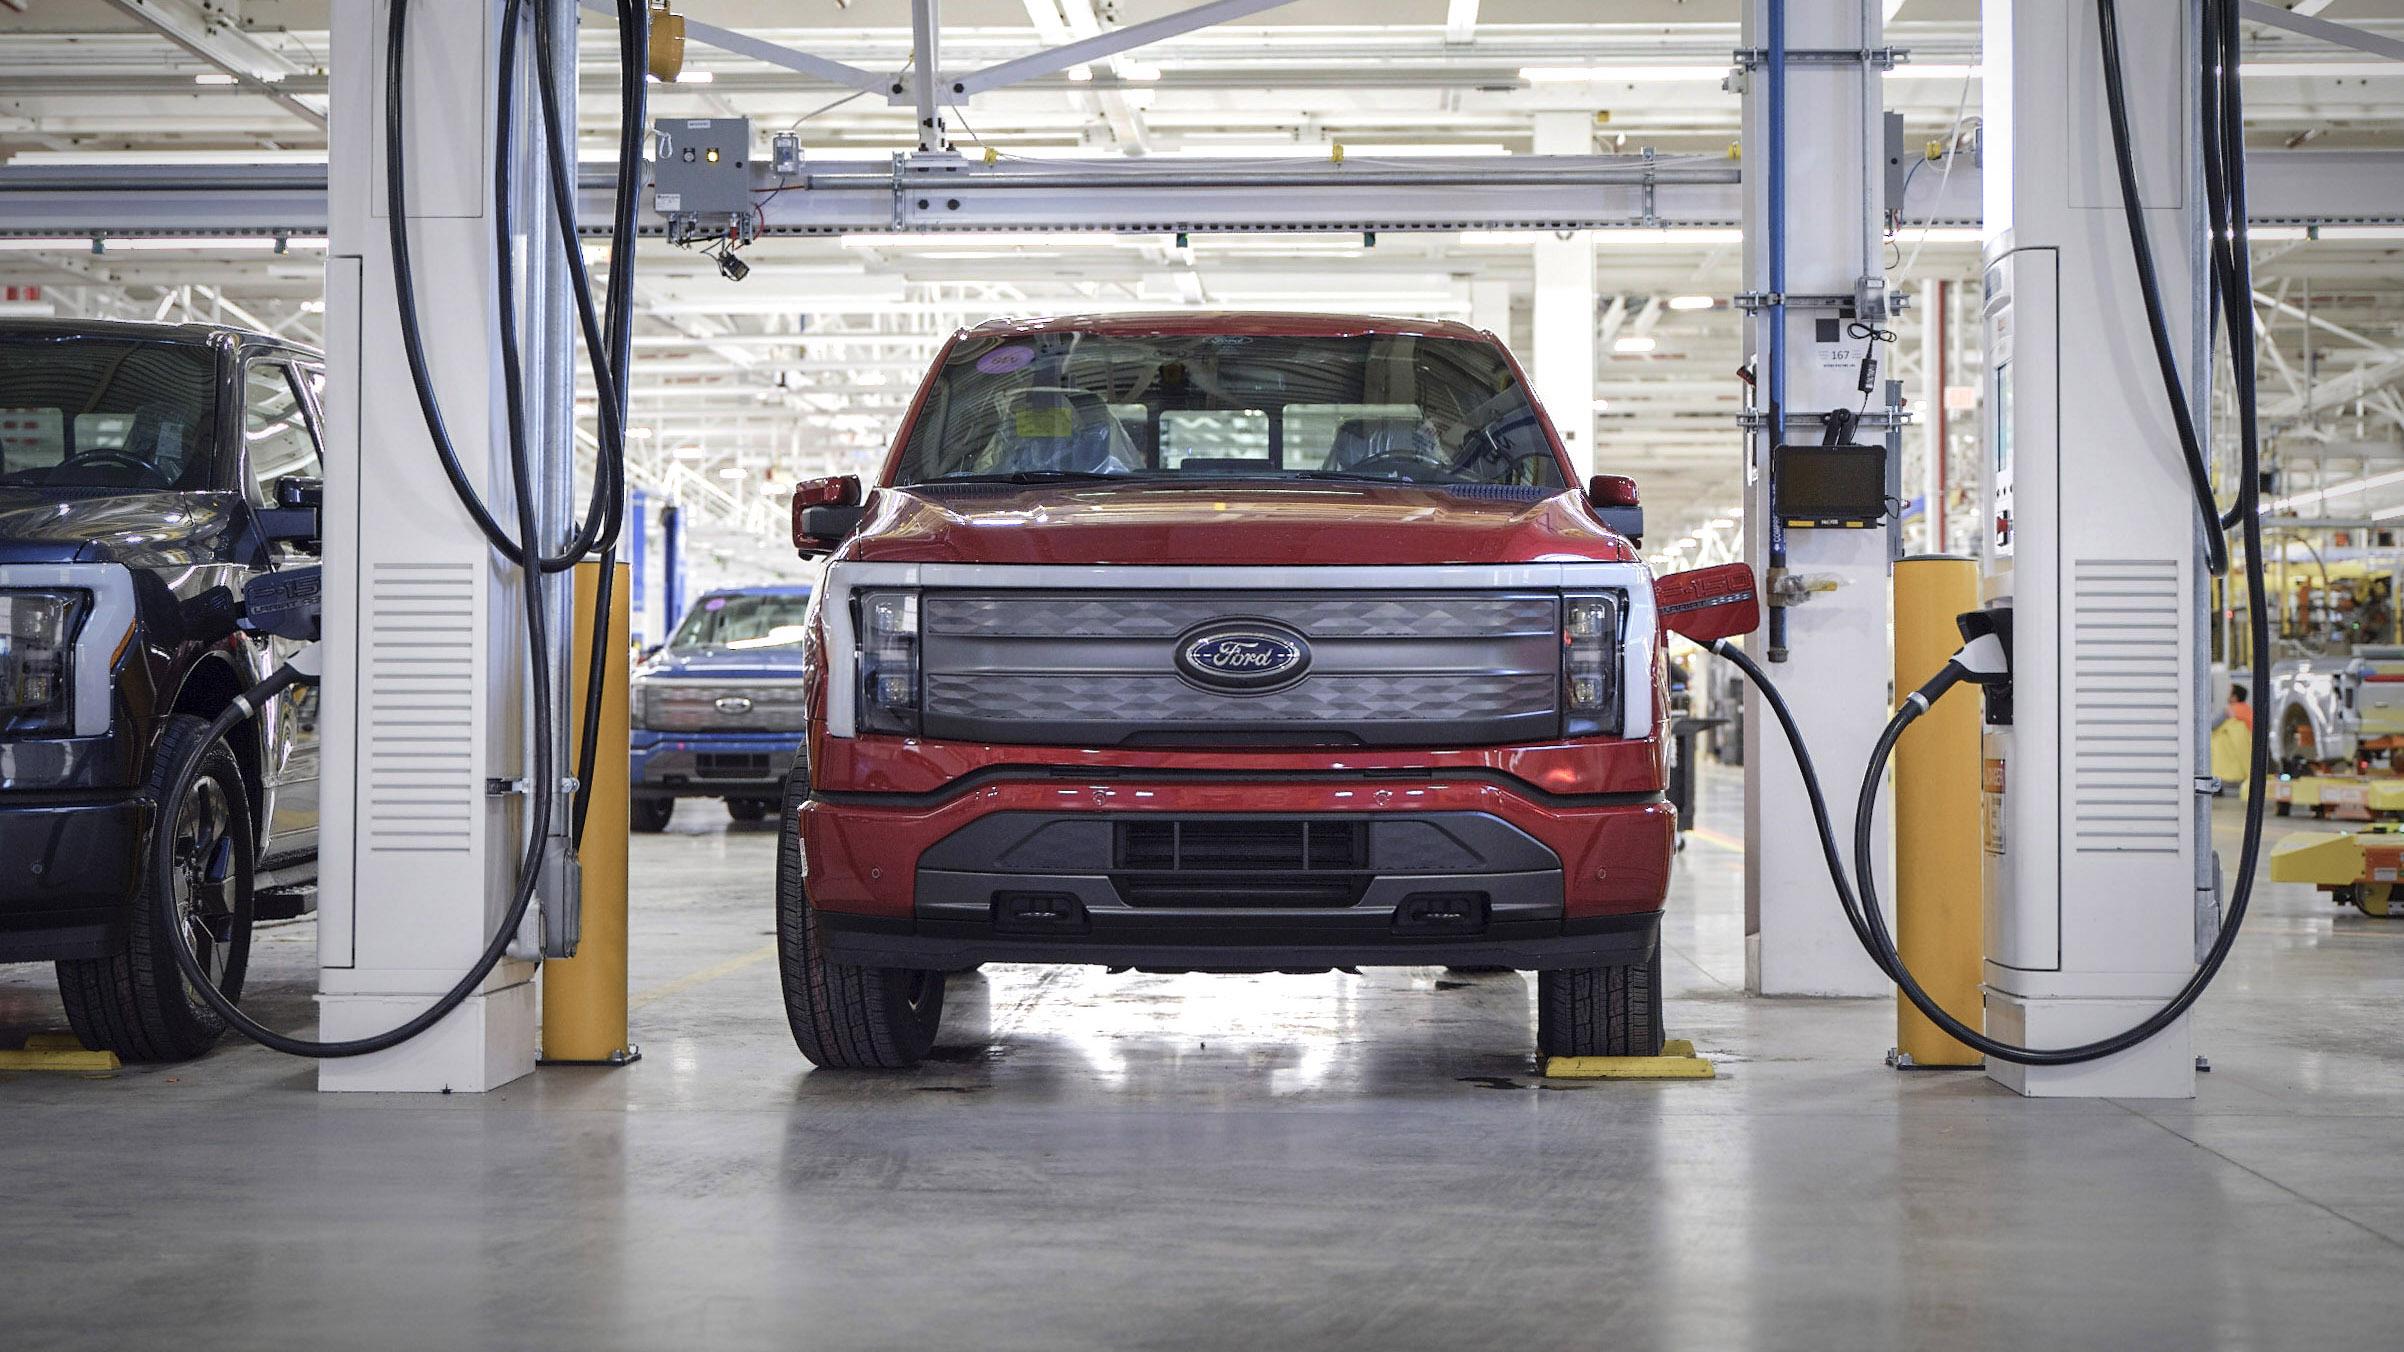 Ford developing LFP batteries for electric vehicles CarExpert